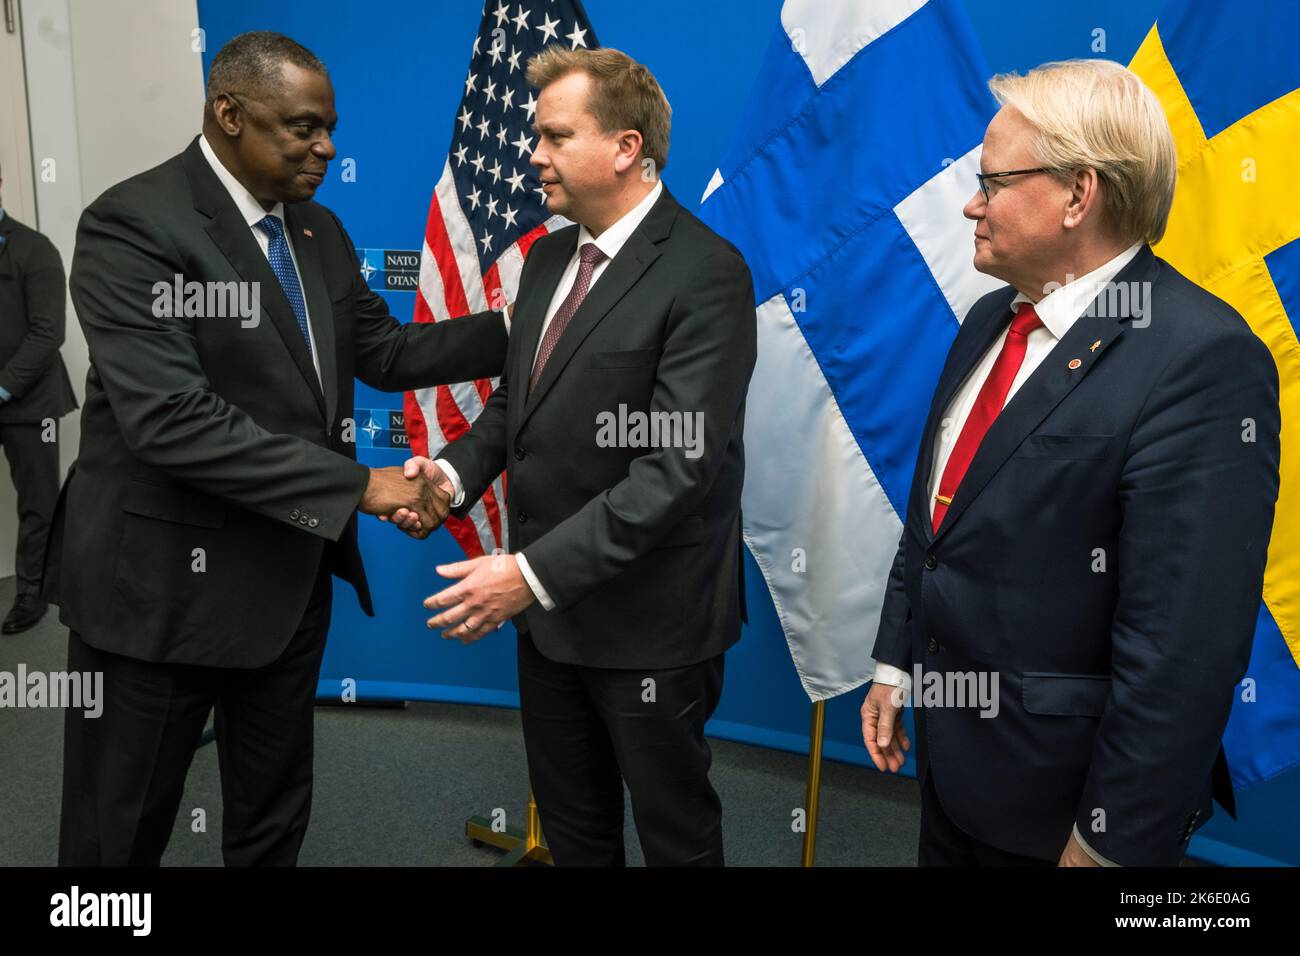 Brussels, Belgium. 13th Oct, 2022. U.S. Secretary of Defense Lloyd J. Austin III, left, greets Finnish Minister of Defence Antti Kaikkonen and Swedish Minister of Defence Peter Hultqvist, right, at the NATO Defense Ministerial, October 13, 2022 in Brussels, Belgium. Credit: Chad J. McNeeley/DOD/Alamy Live News Stock Photo